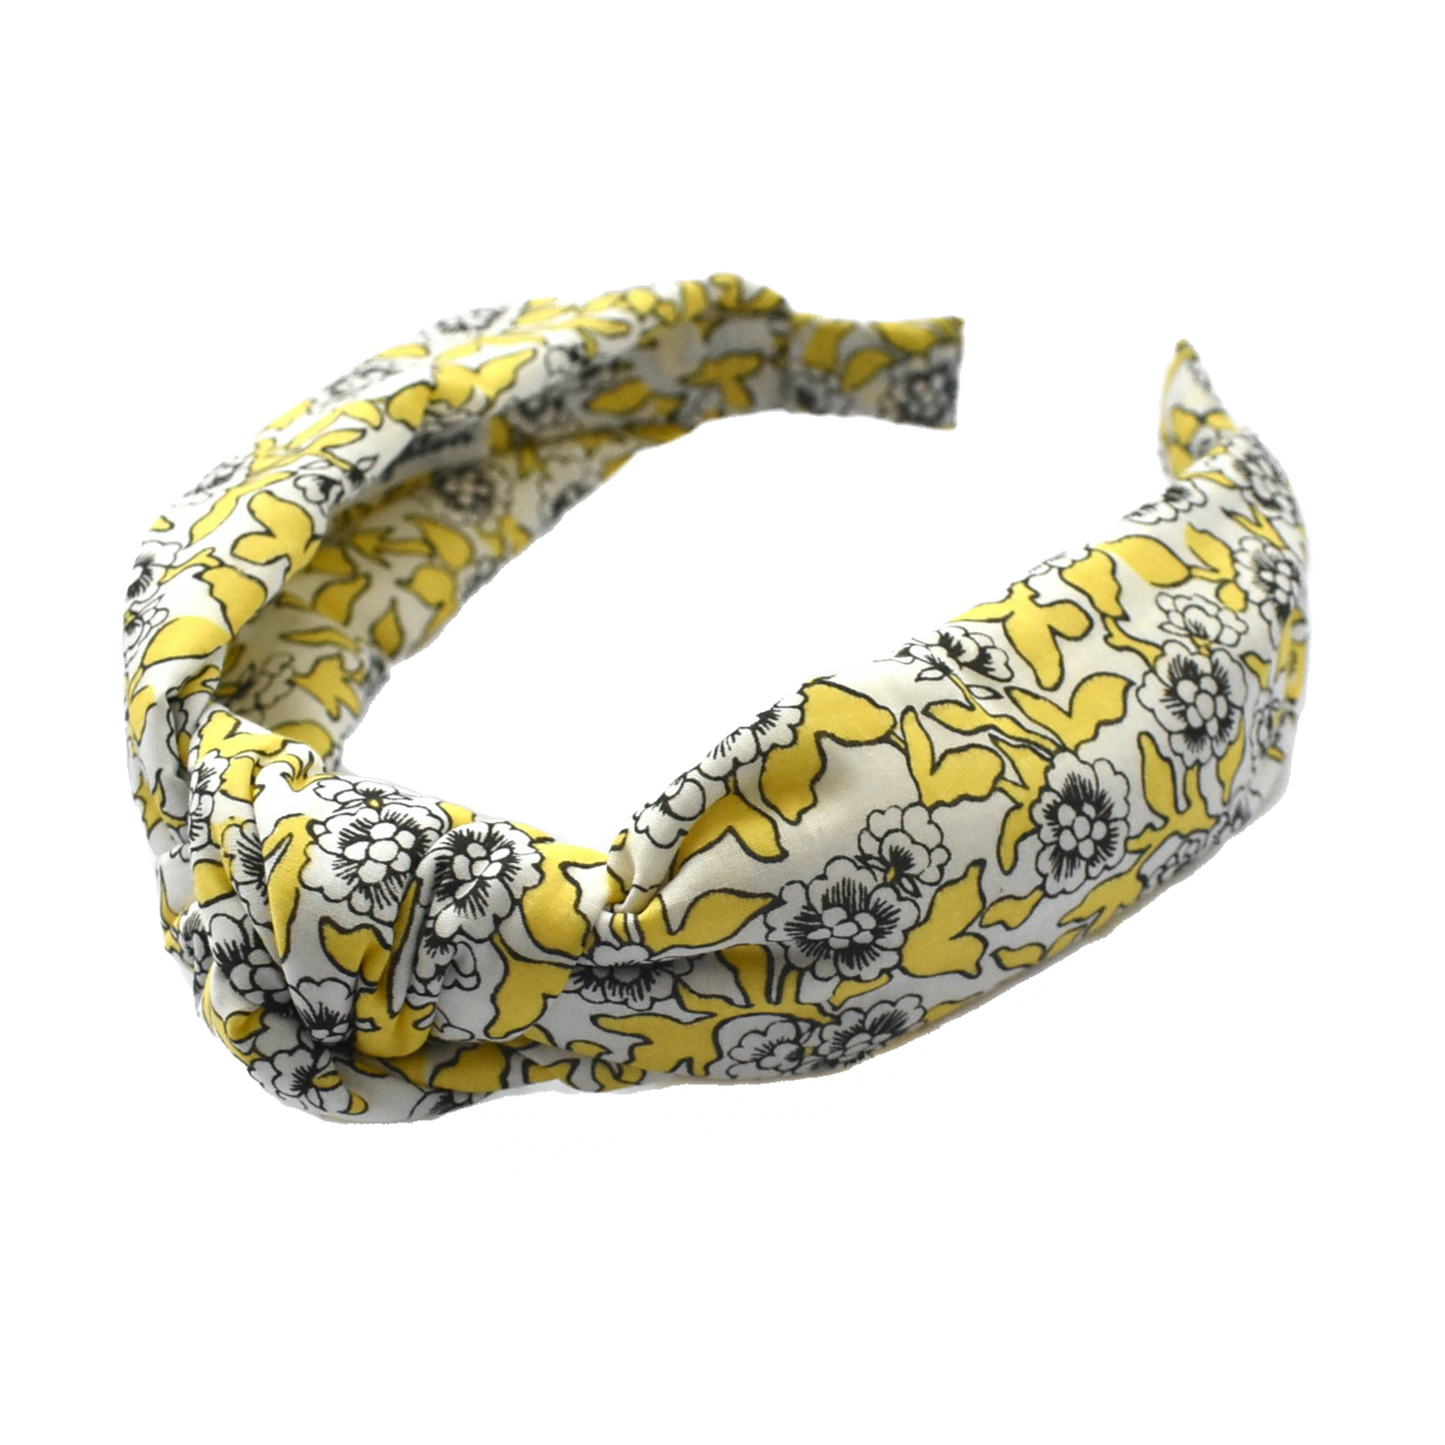 Classic Knot head band - Yellow and Black Floral Liberty of London Dinisty print